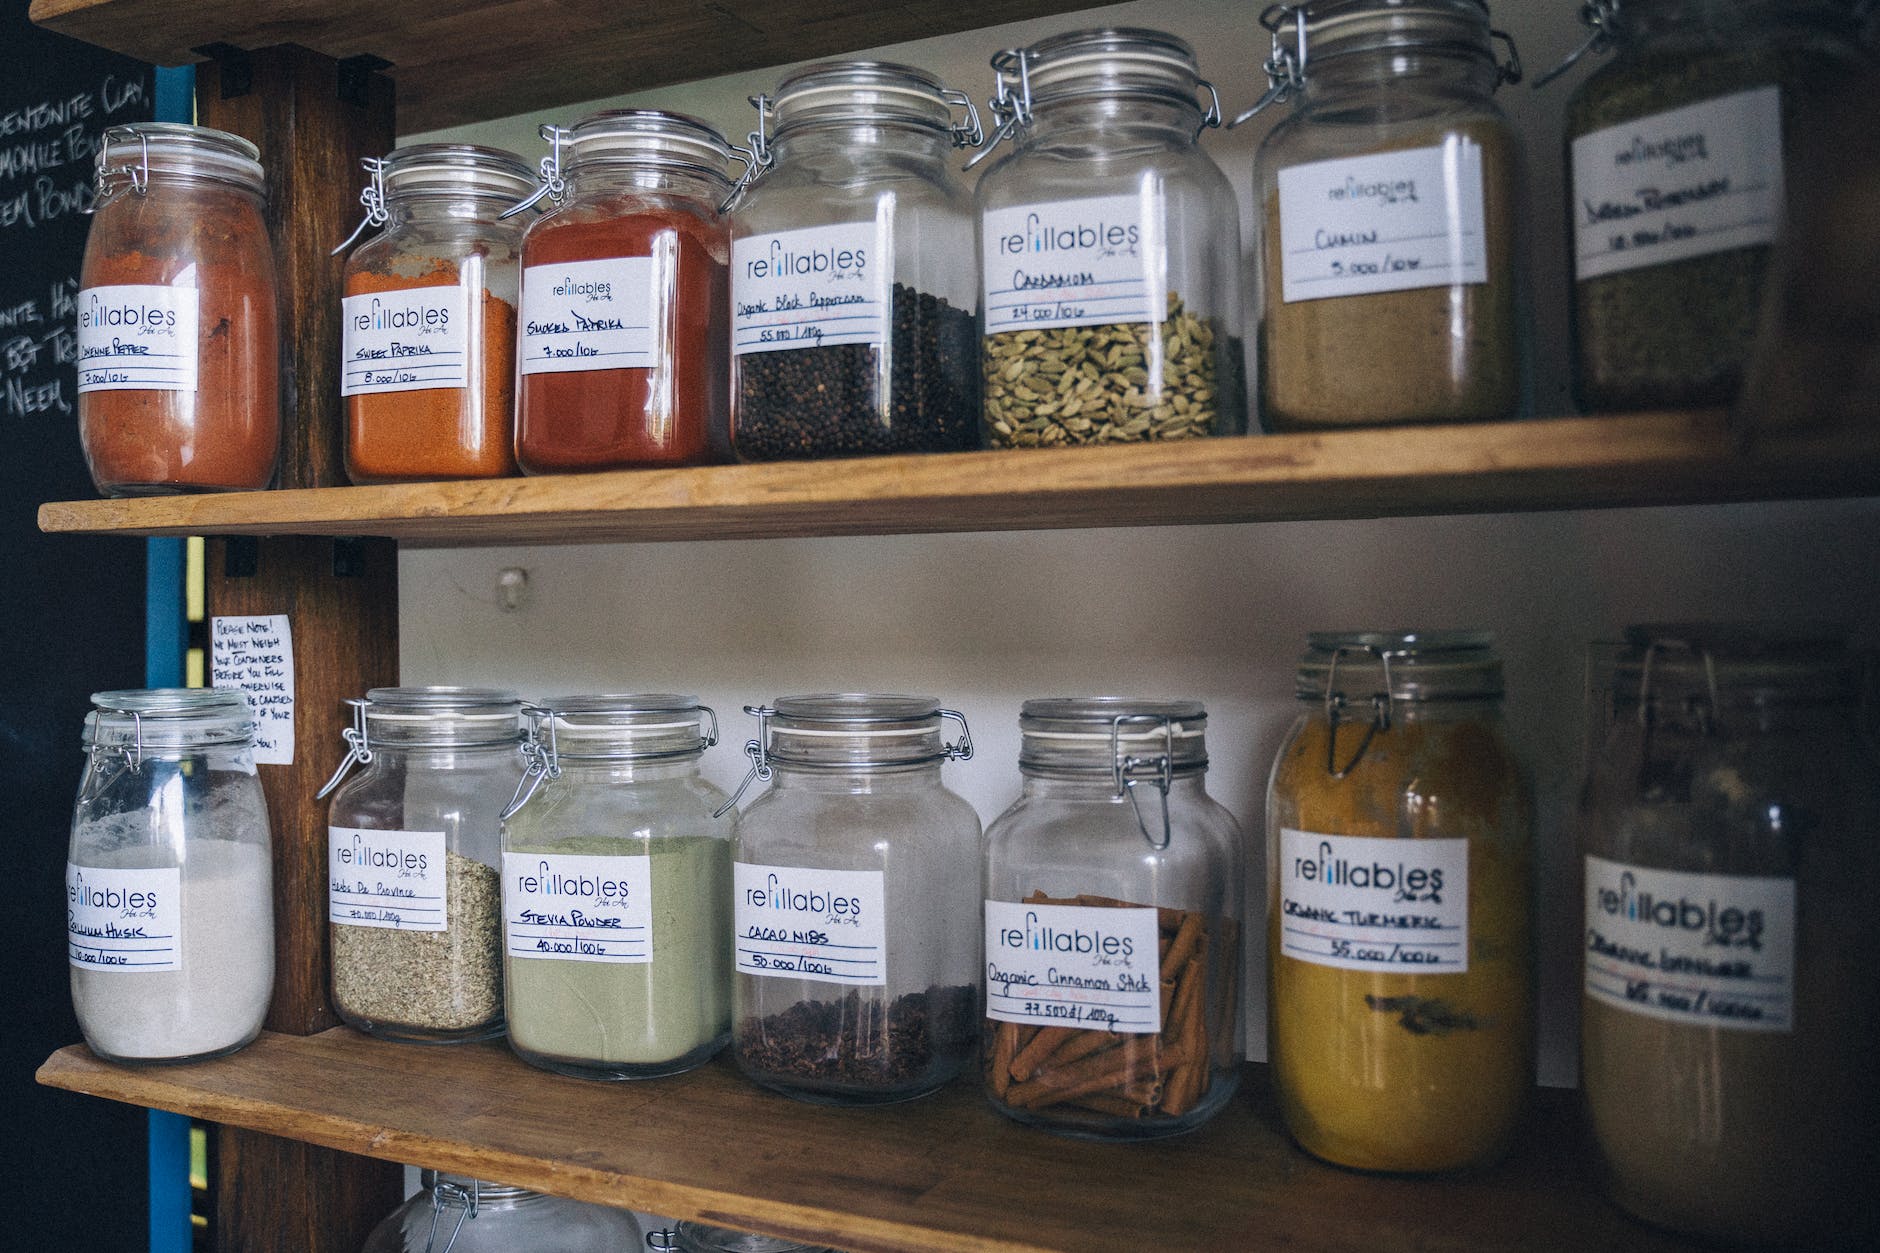 assorted items in refillable jar containers on wooden shelves